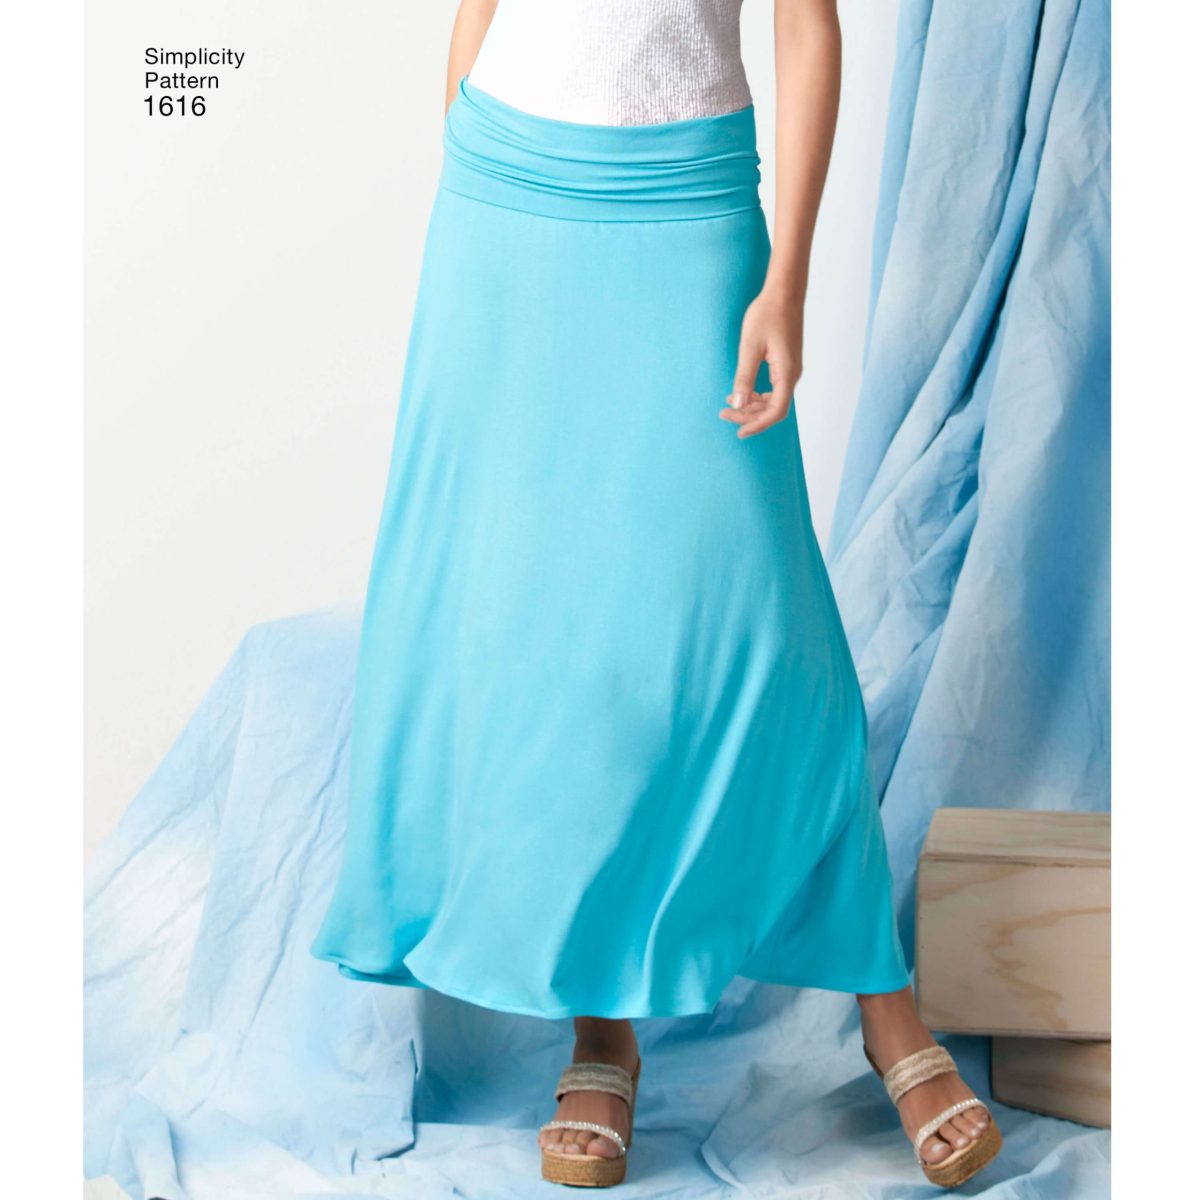 Simplicity Sewing Pattern 1616 Misses' Knit or Woven Skirts